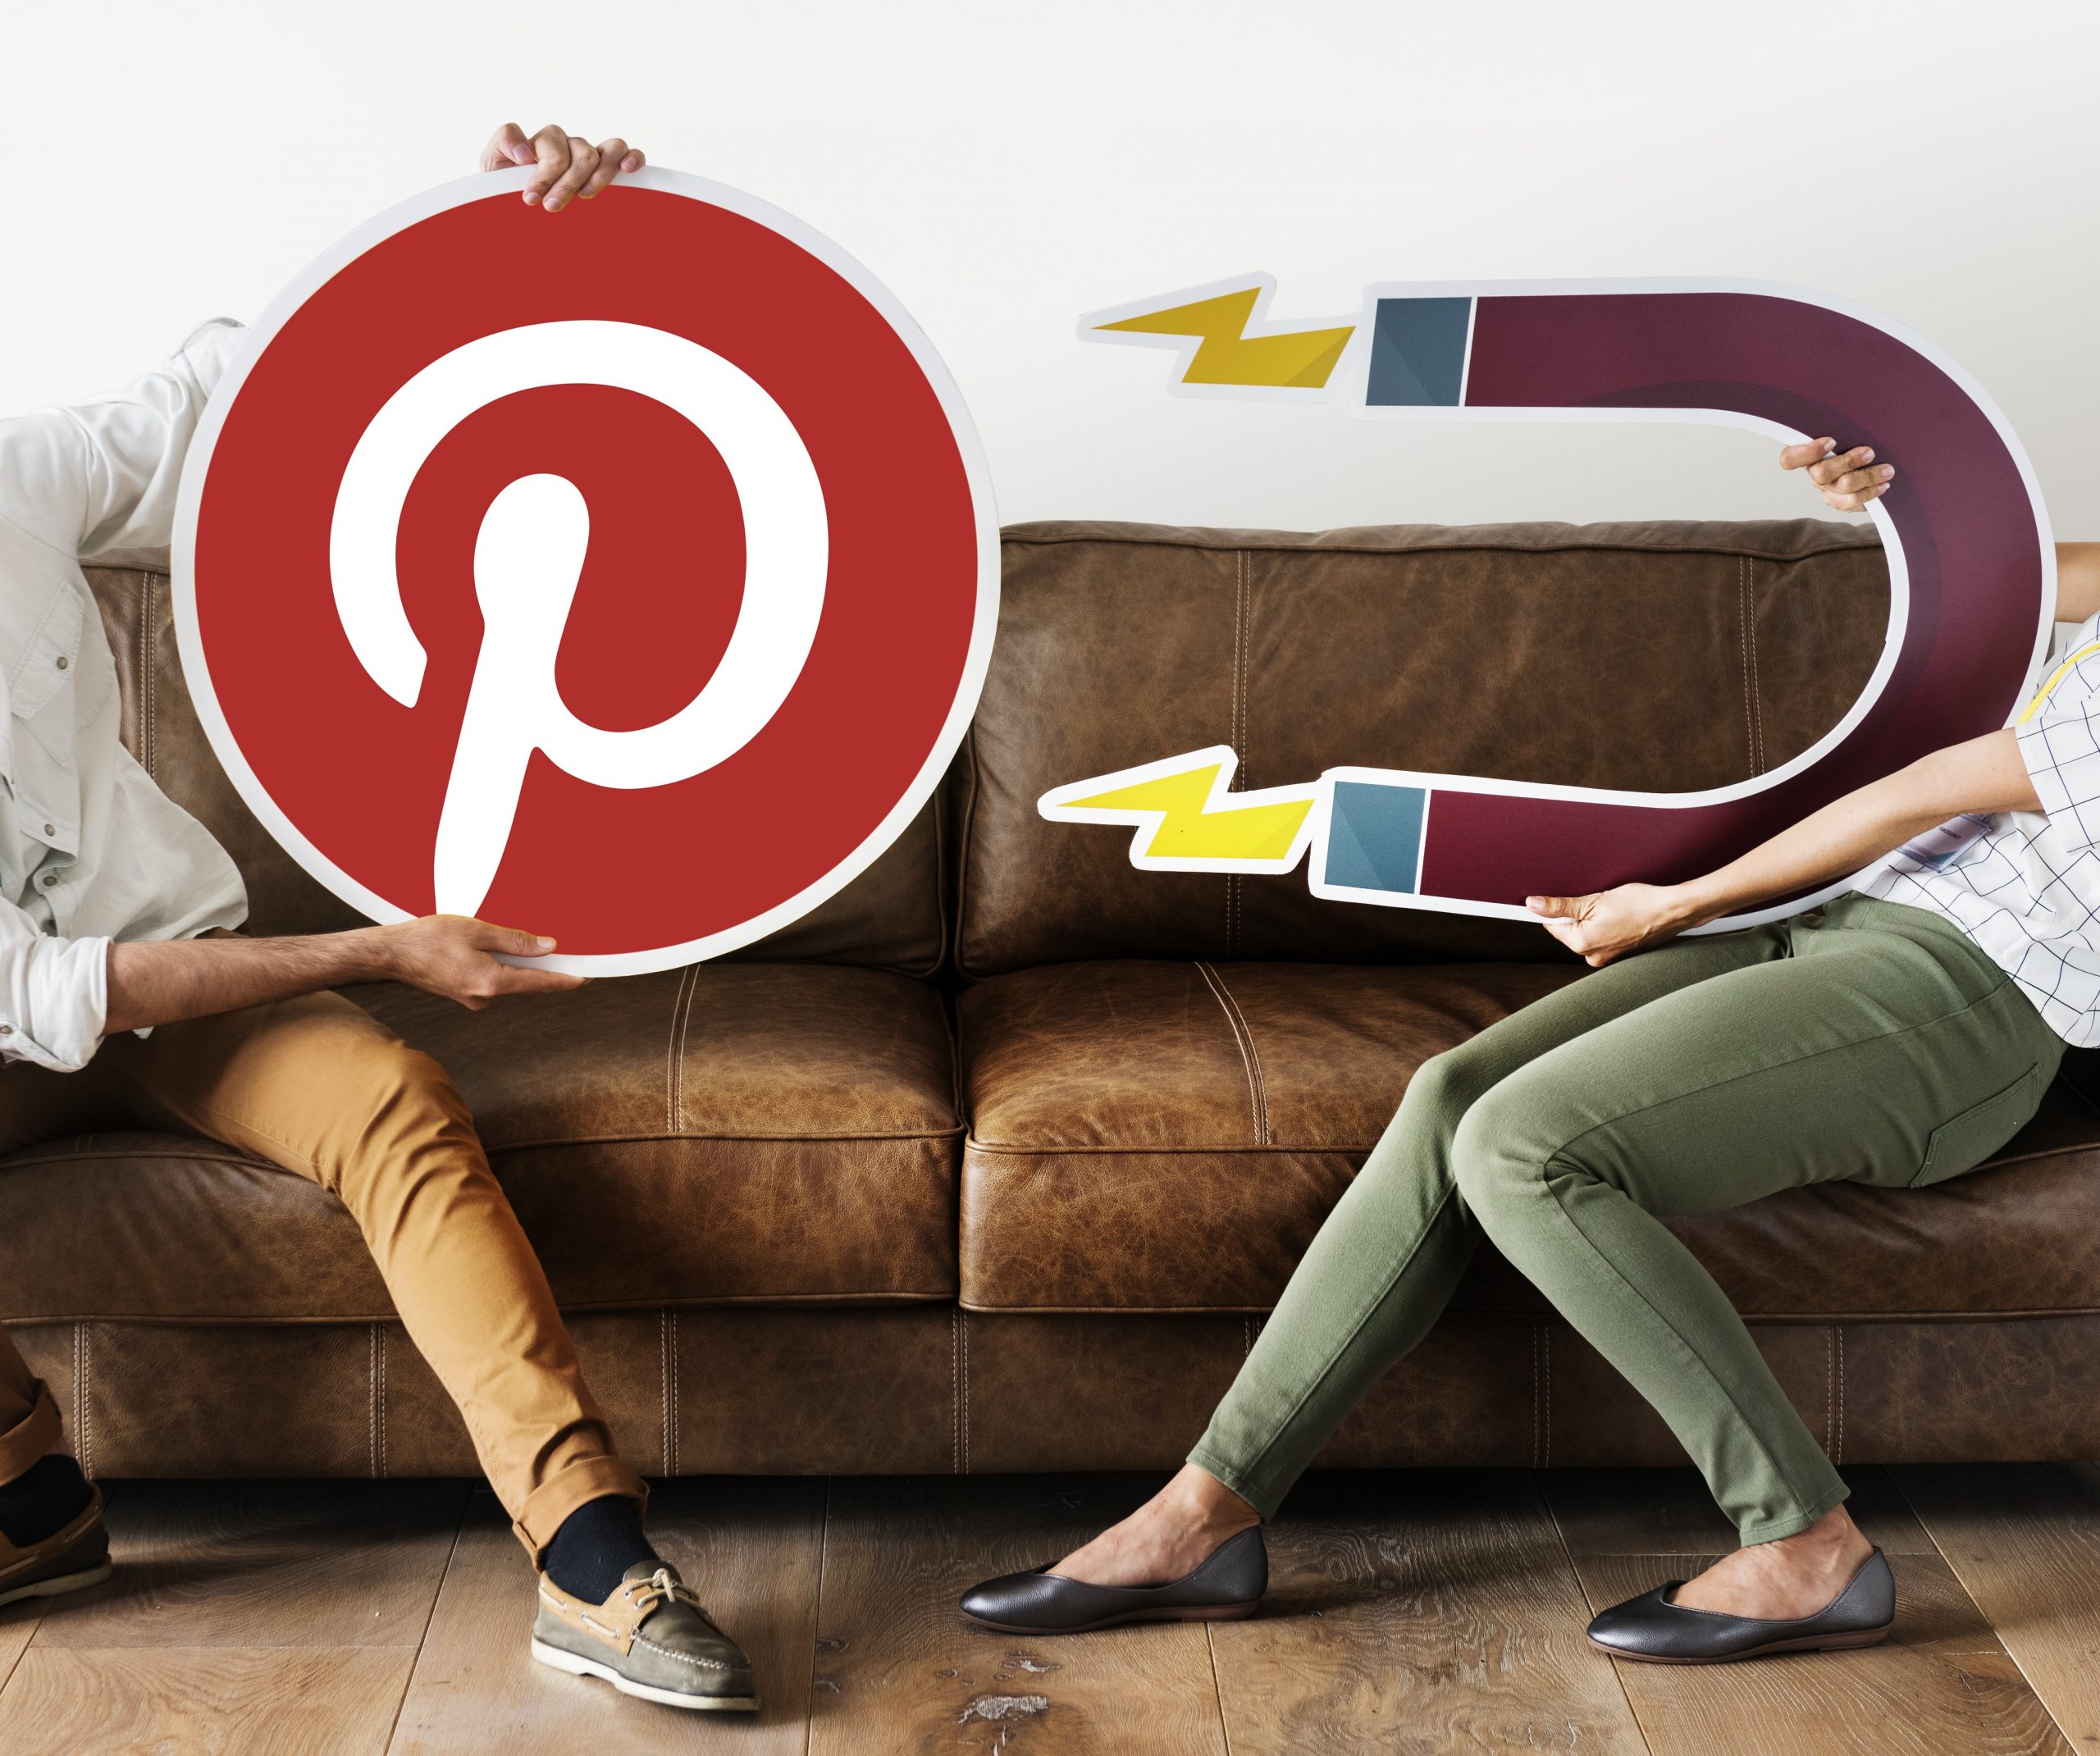 Pinterest Ad targeting: Gearing up for success